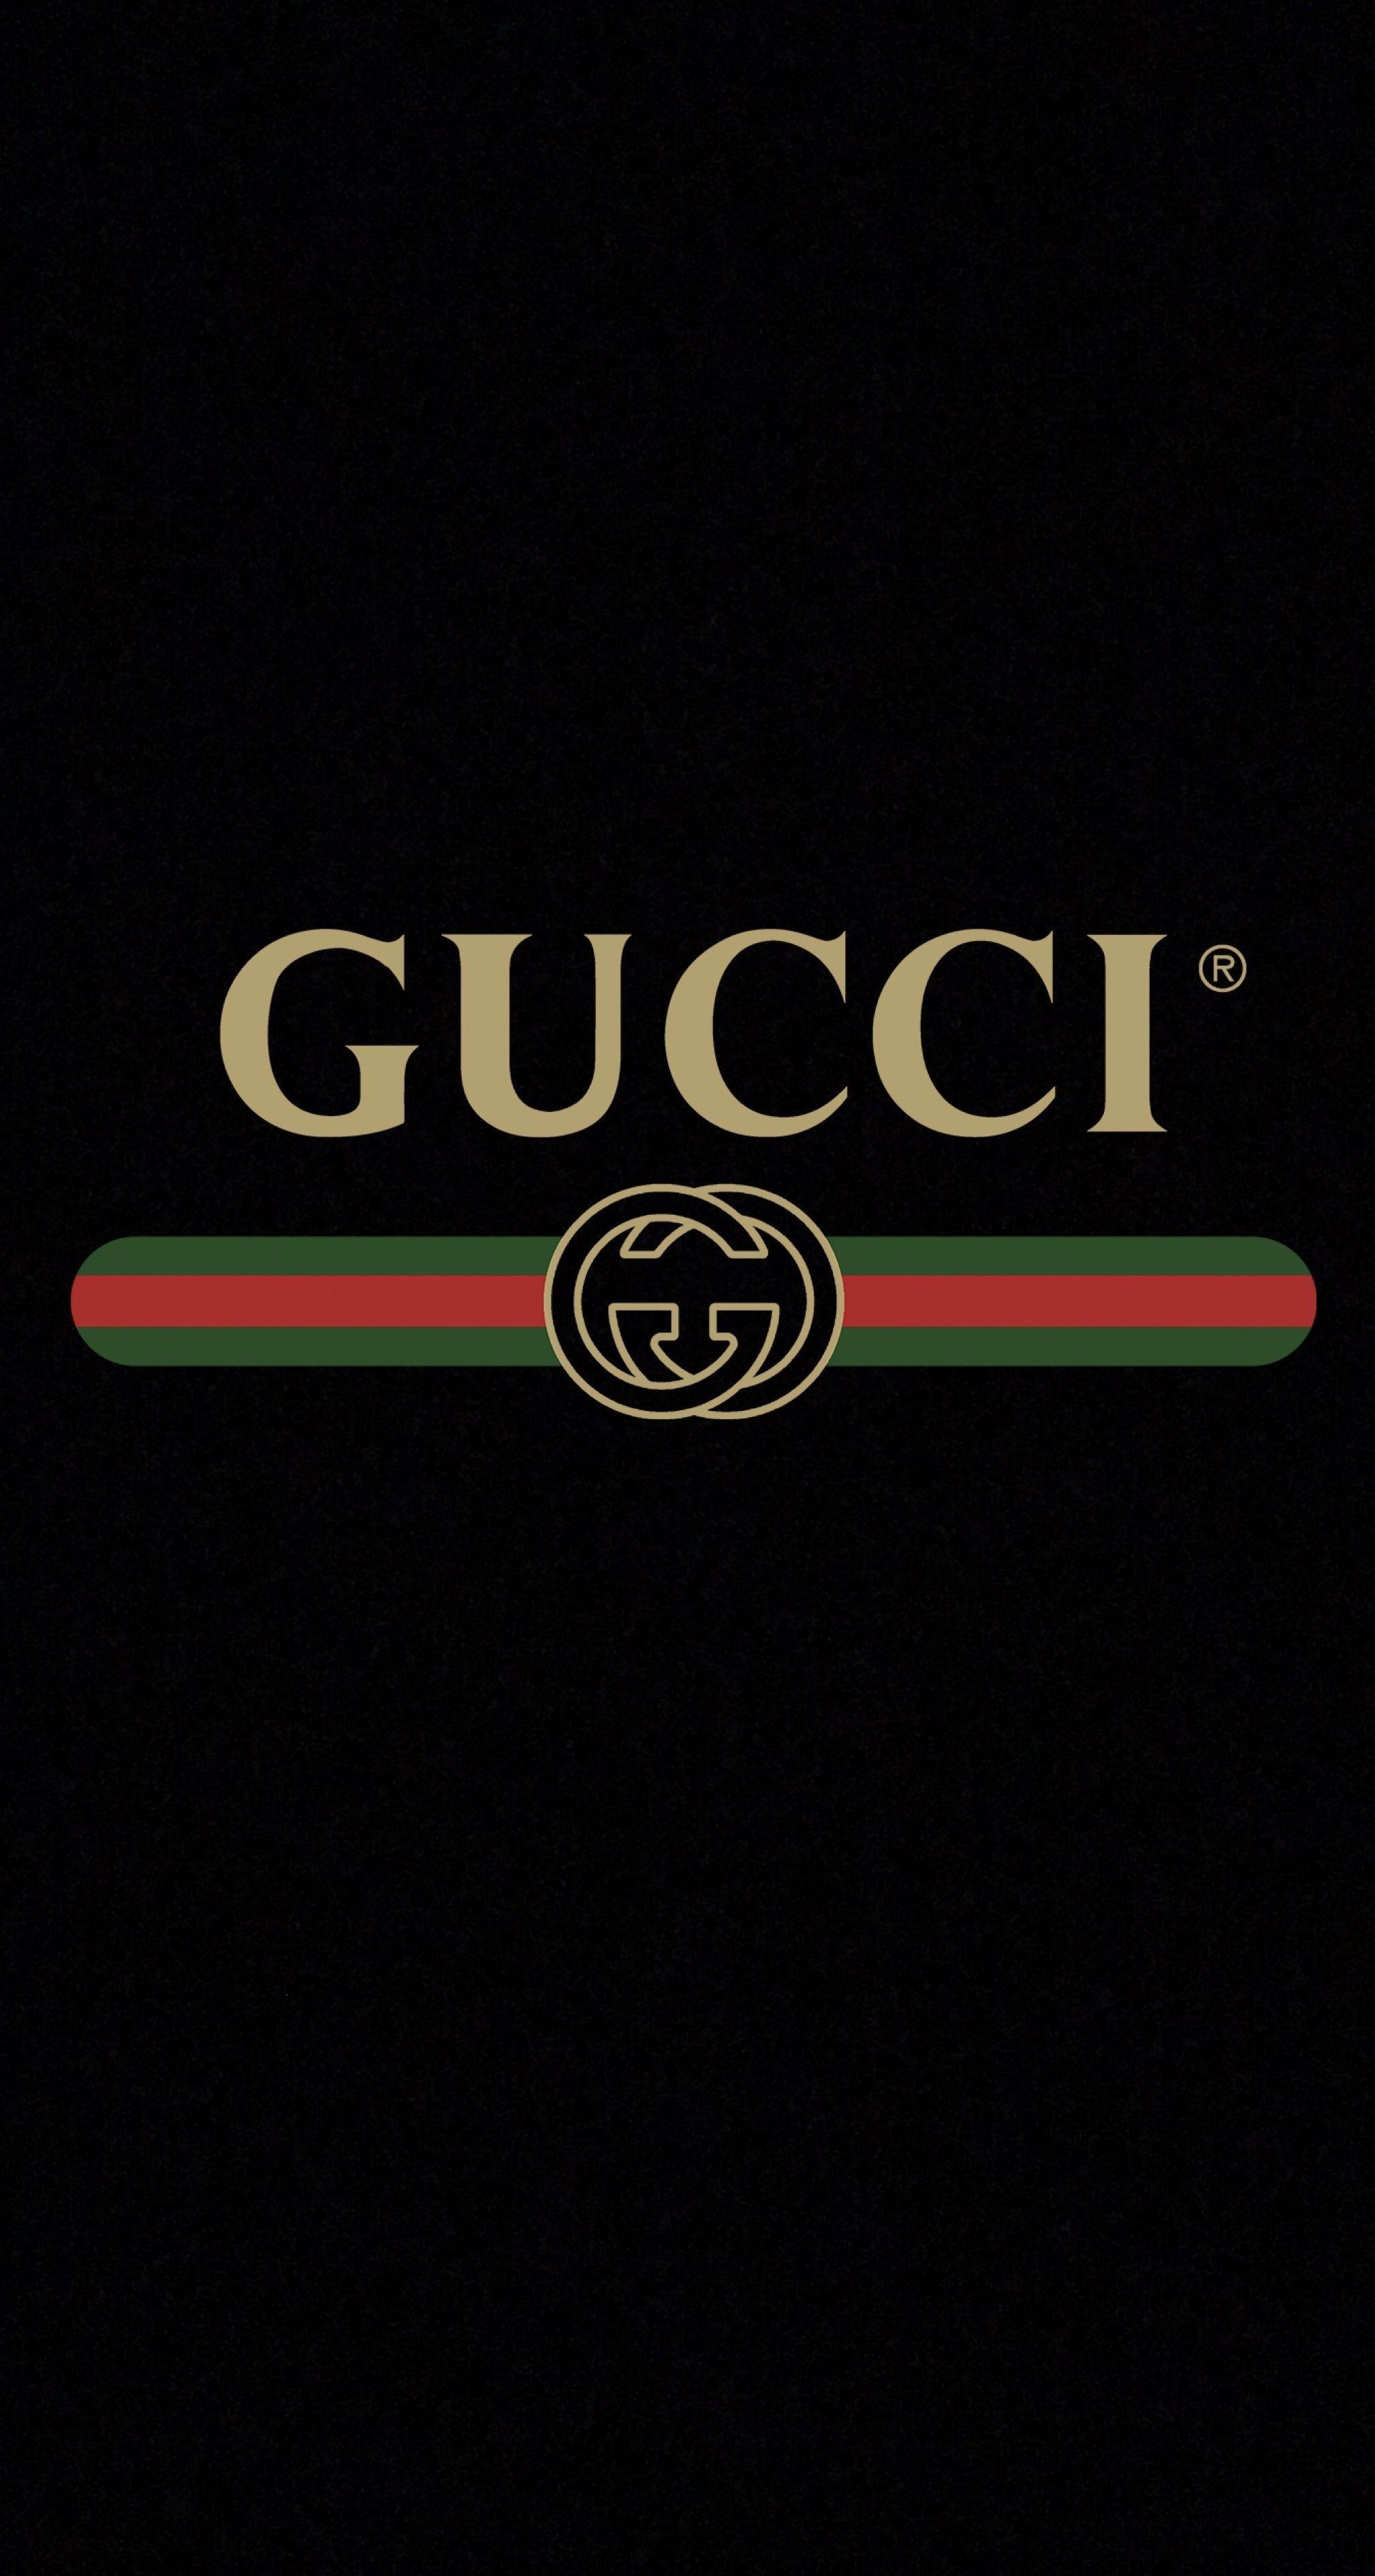 Cool Gucci Logo - 85+ Gucci Logo Wallpapers on WallpaperPlay